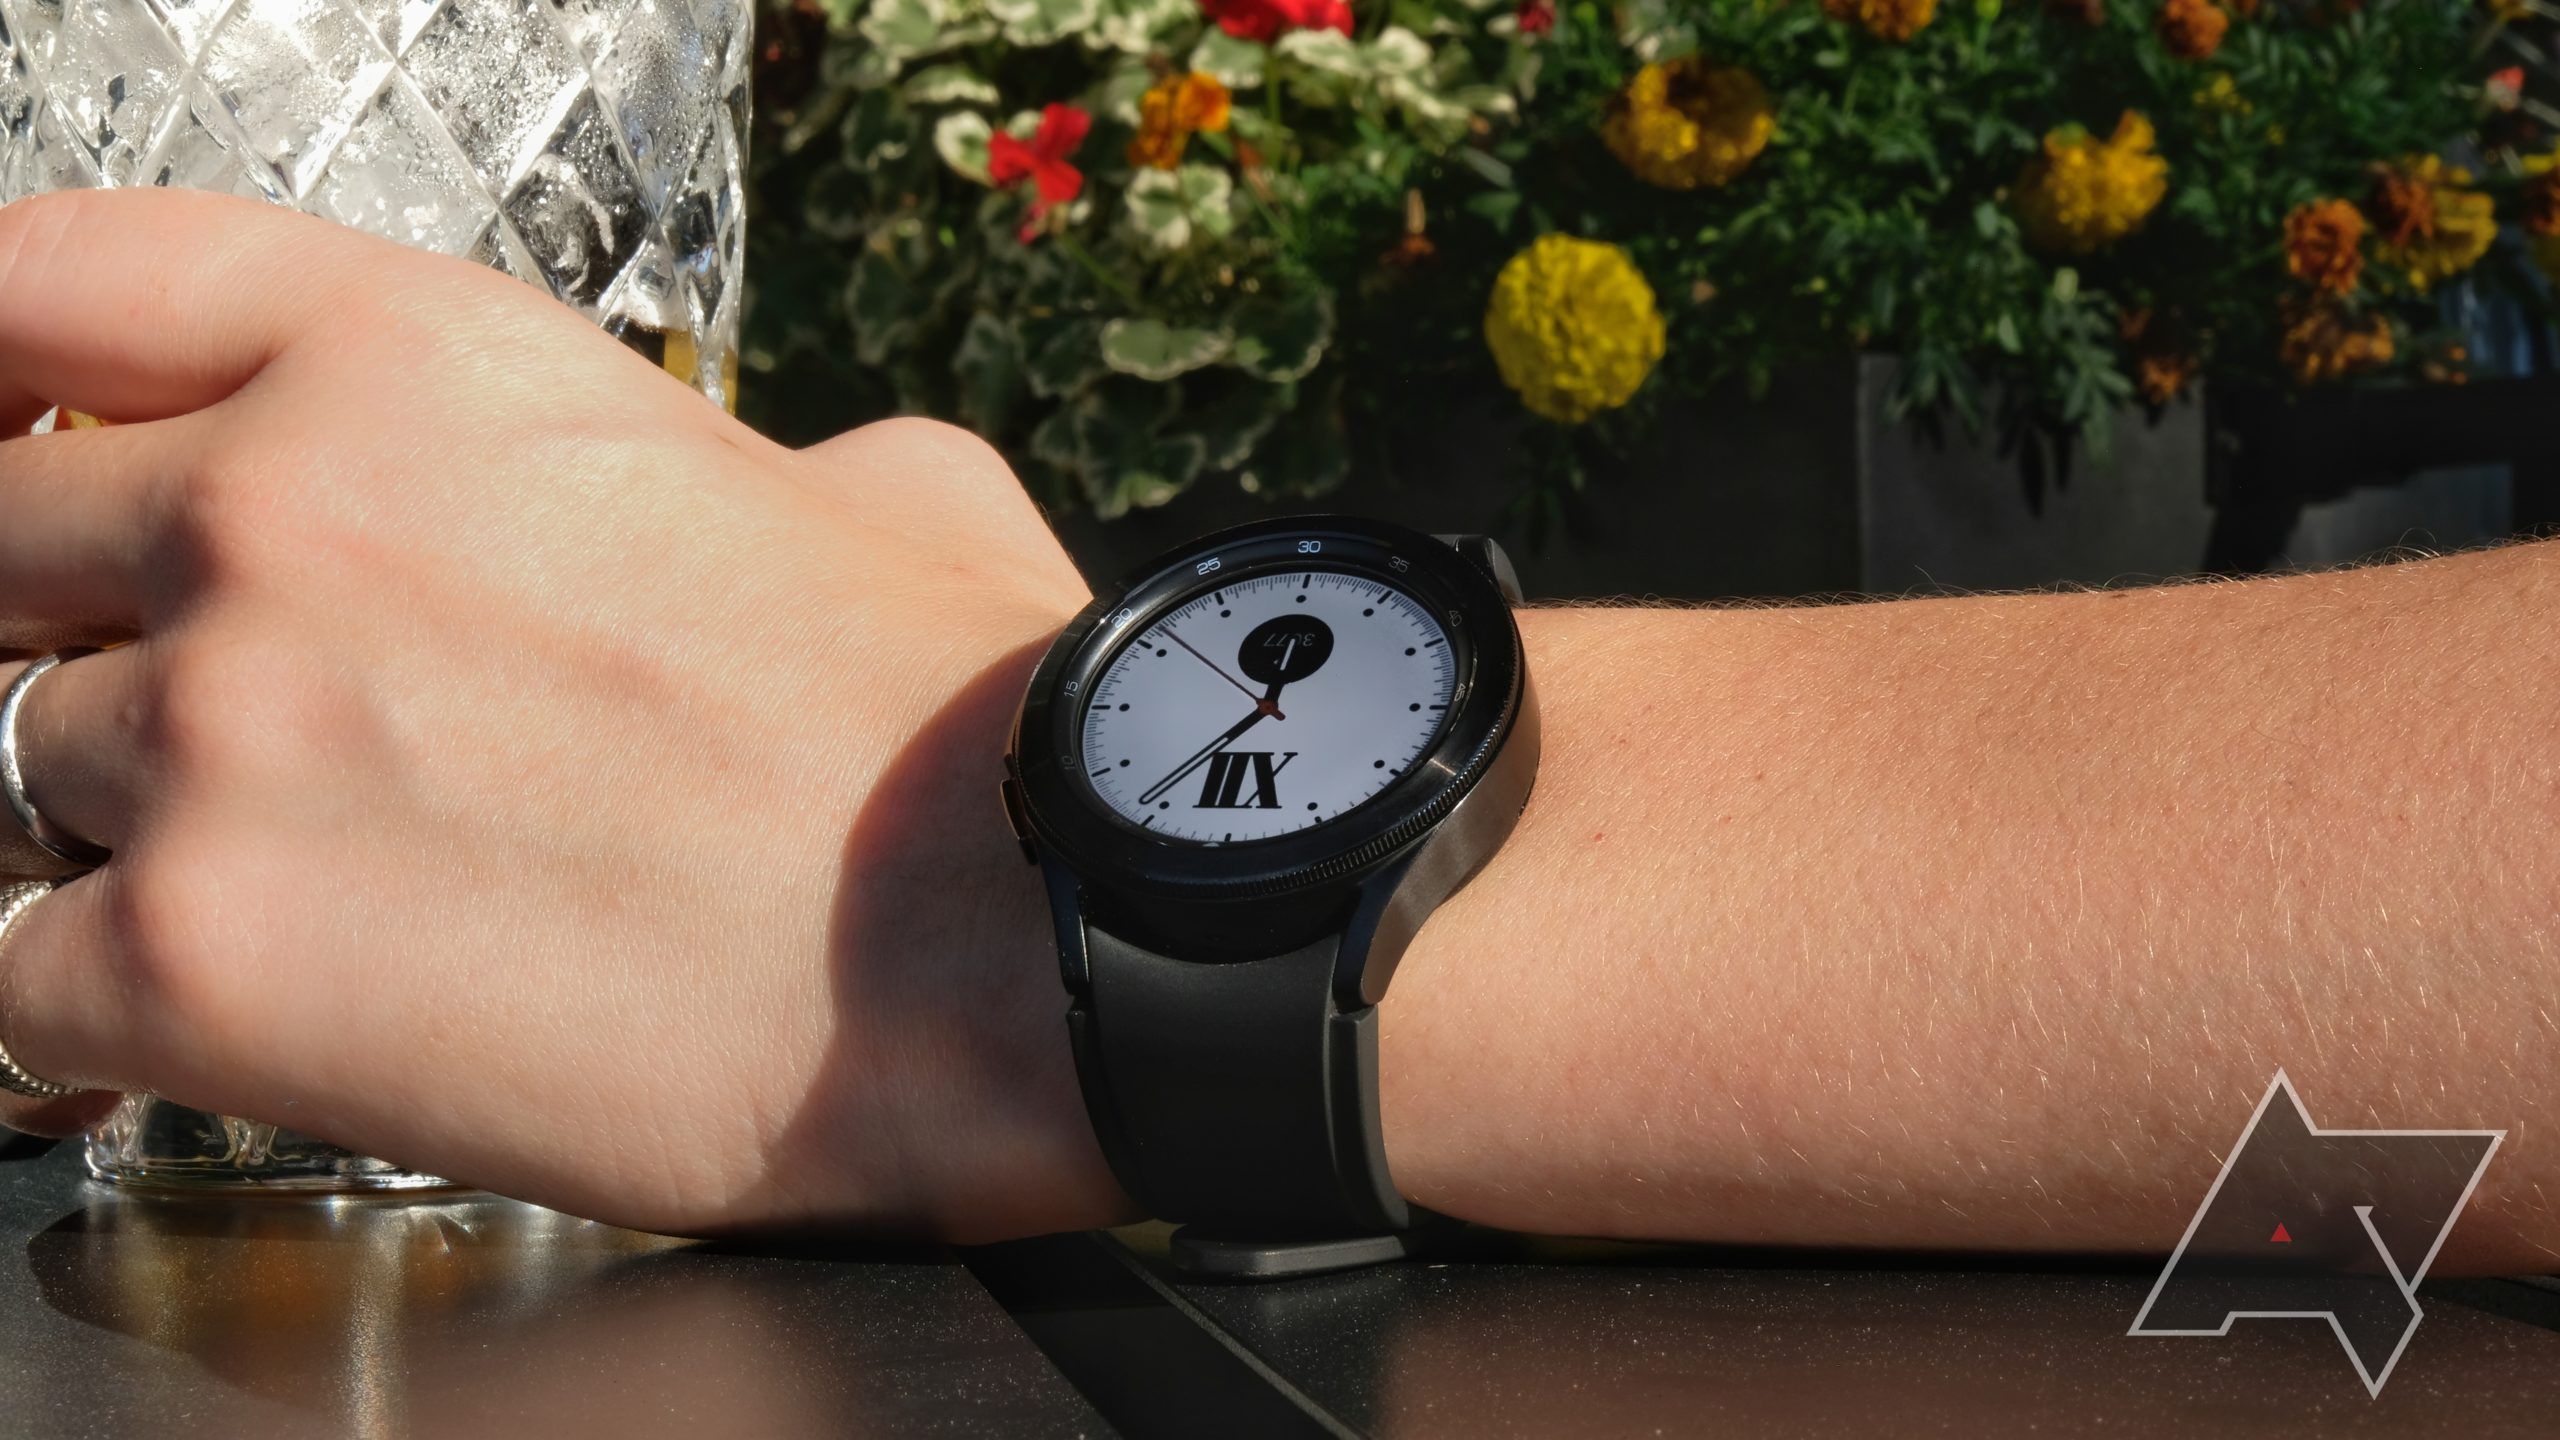 Samsung Galaxy Watch 4: Release Date, Price, Features